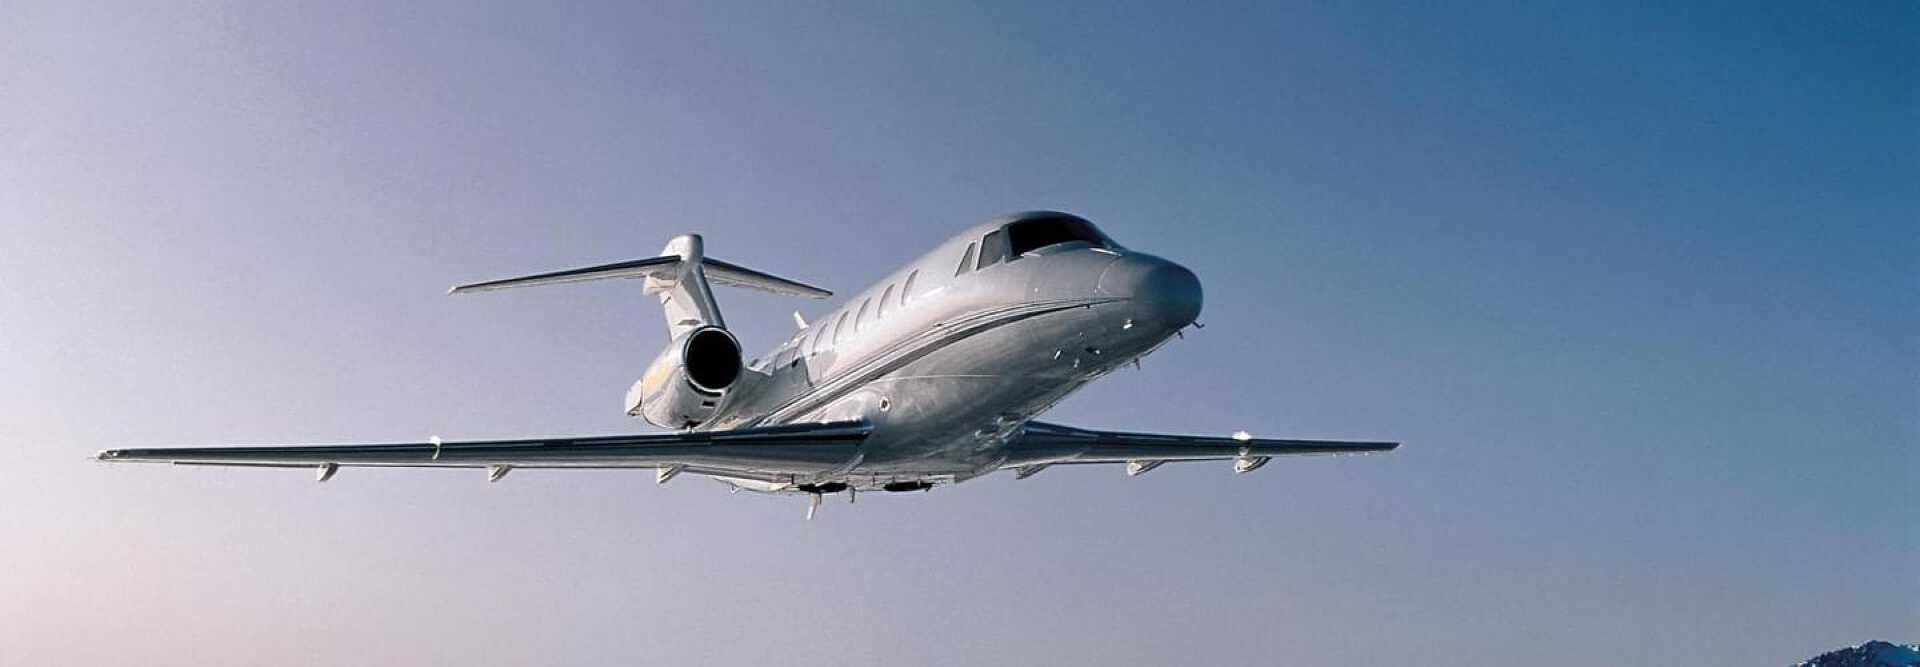 Midsize Jet Cessna Citation VII to charter for private intercontinental flights with LunaJets, travel comfortable and luxurious